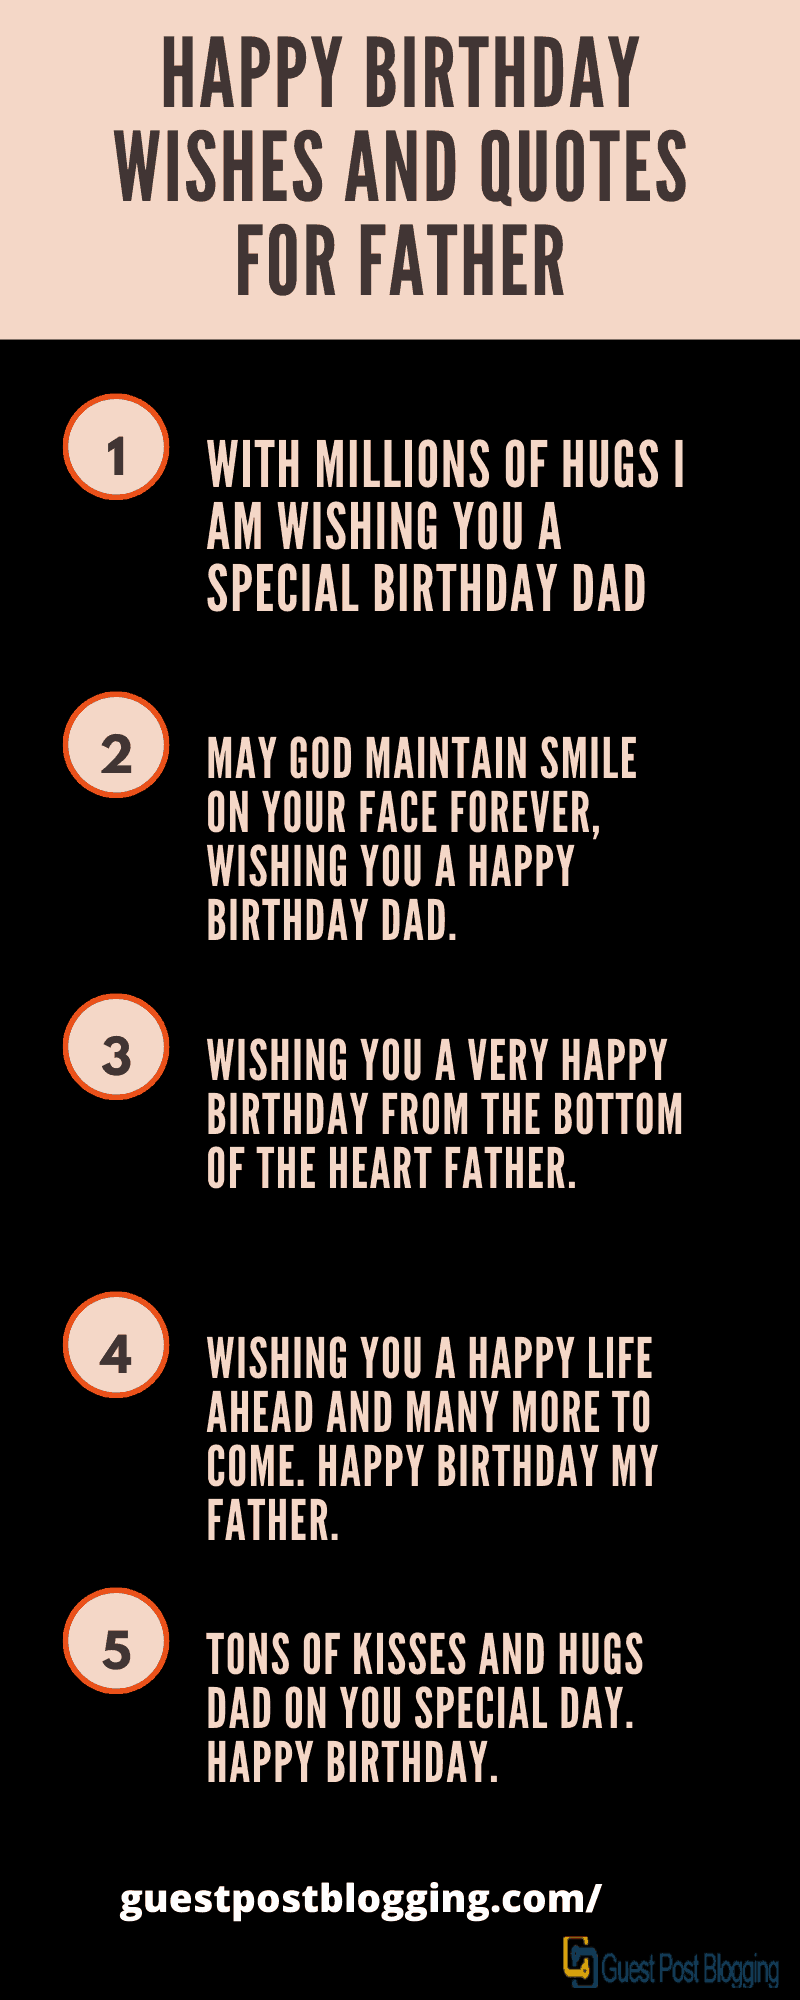 Happy Birthday Wishes and Quotes for Father